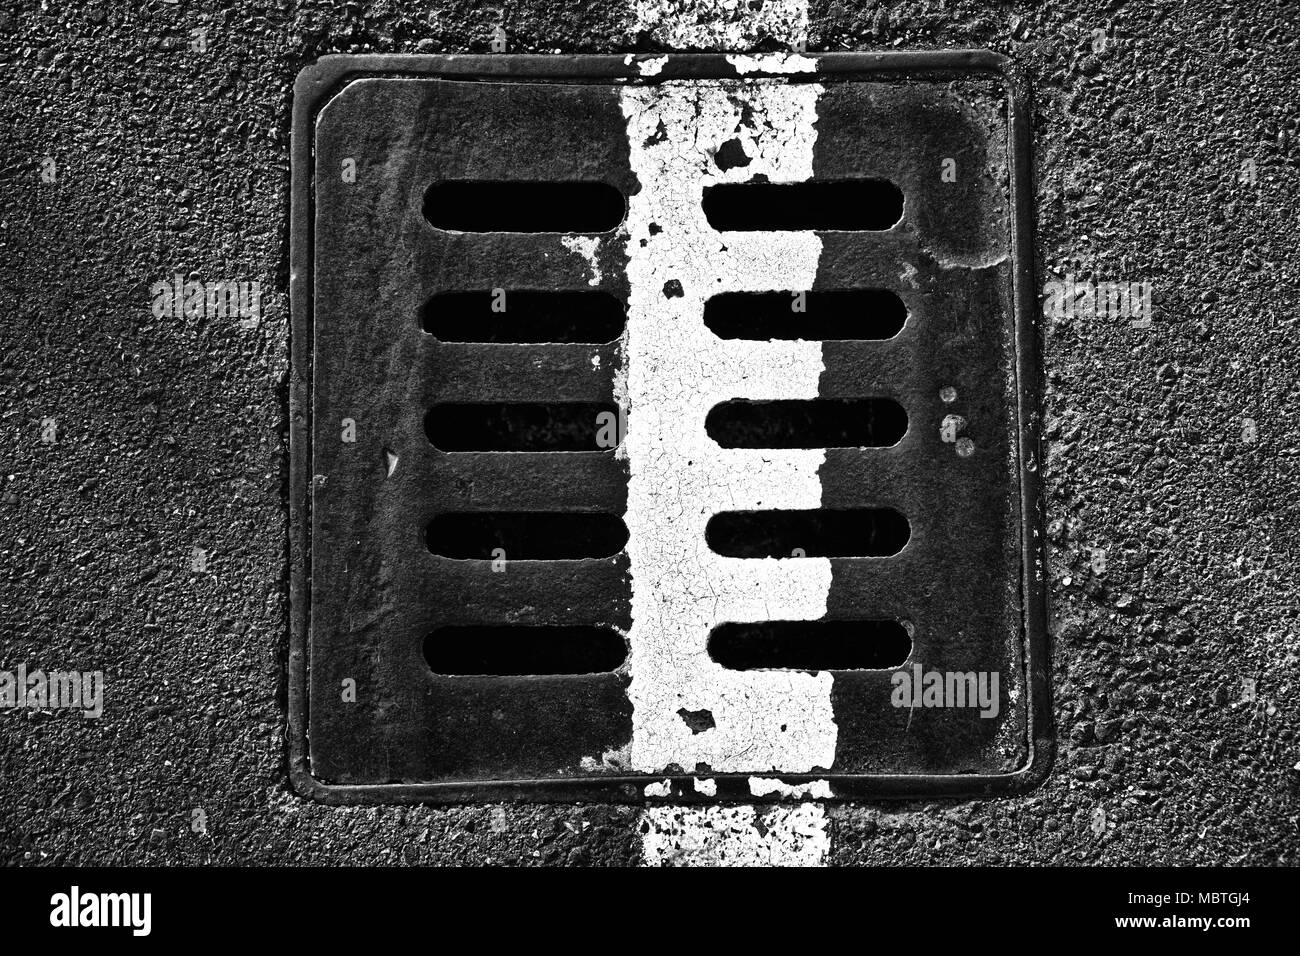 Square metal hatch in urban pavement, sewer manhole cover with marking lines. Stock Photo